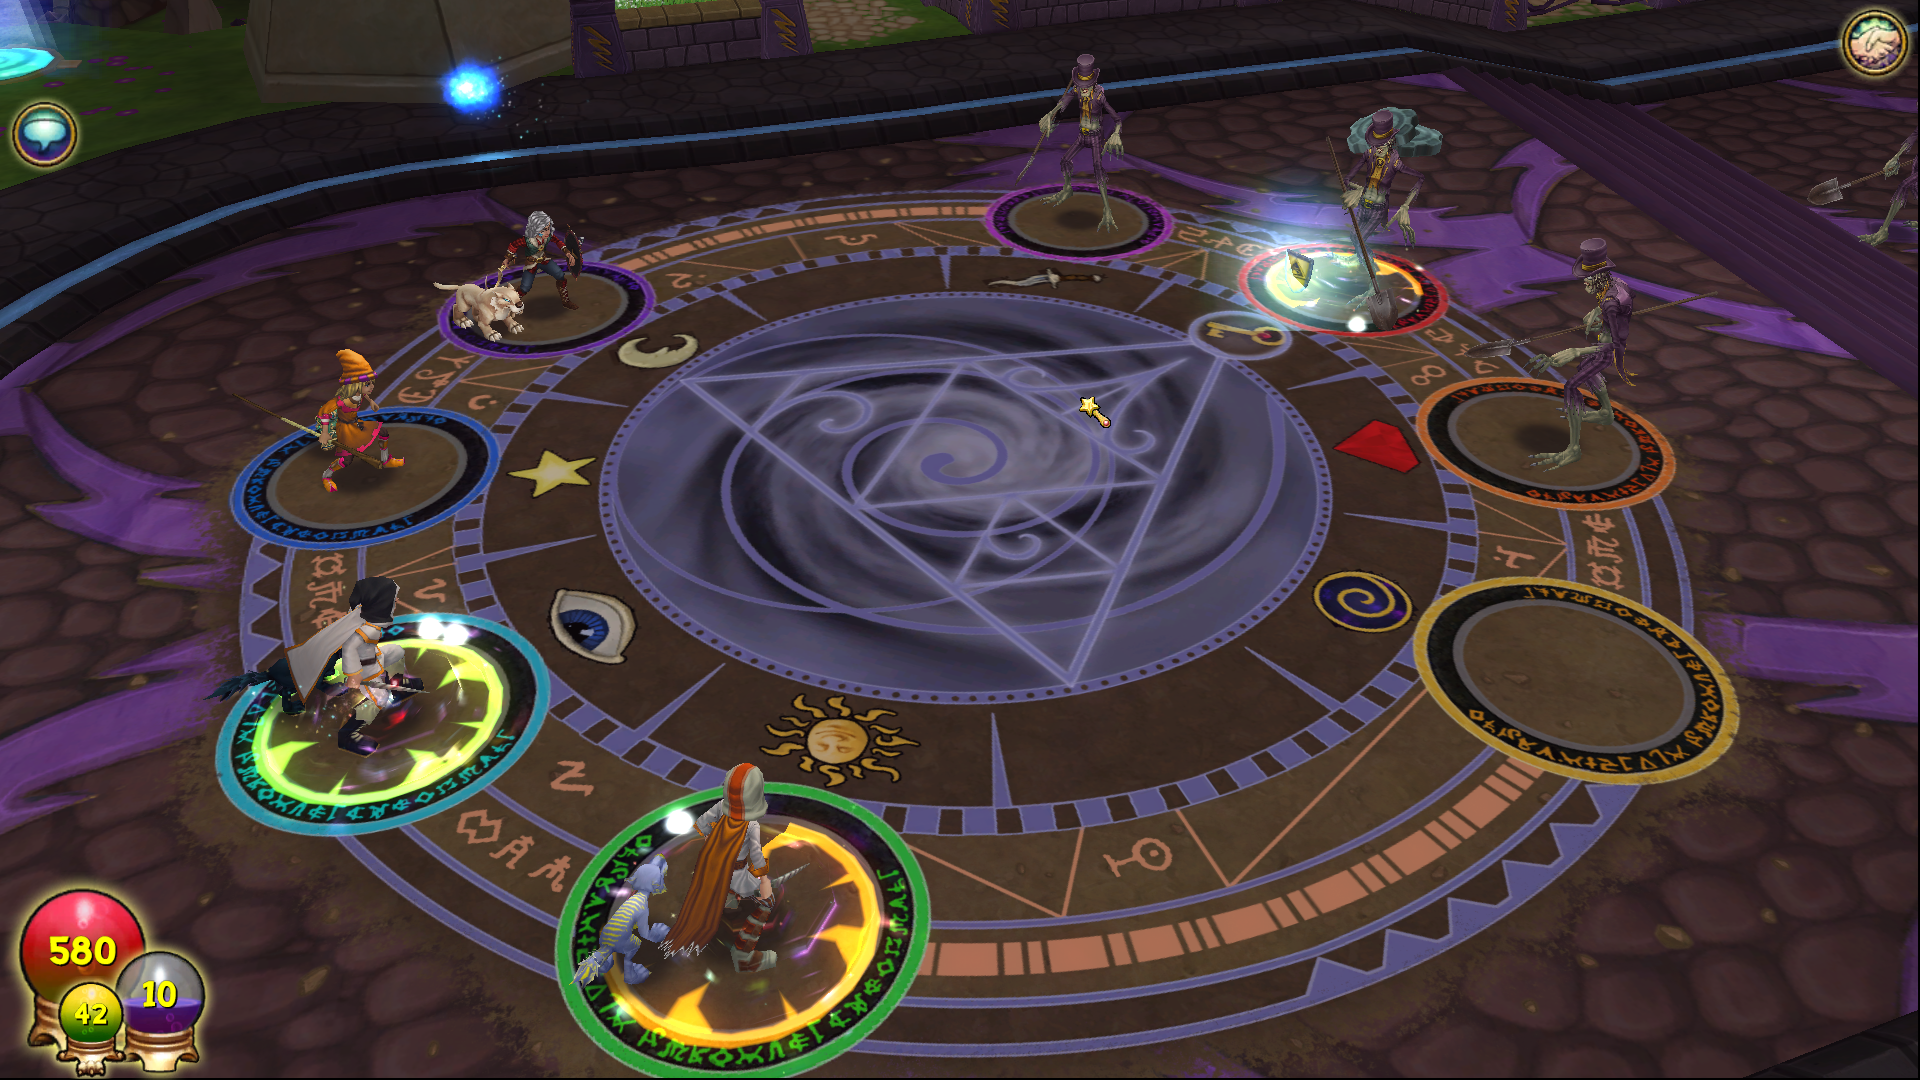 Choose My Adventure: The combat is the sauce in Wizard101